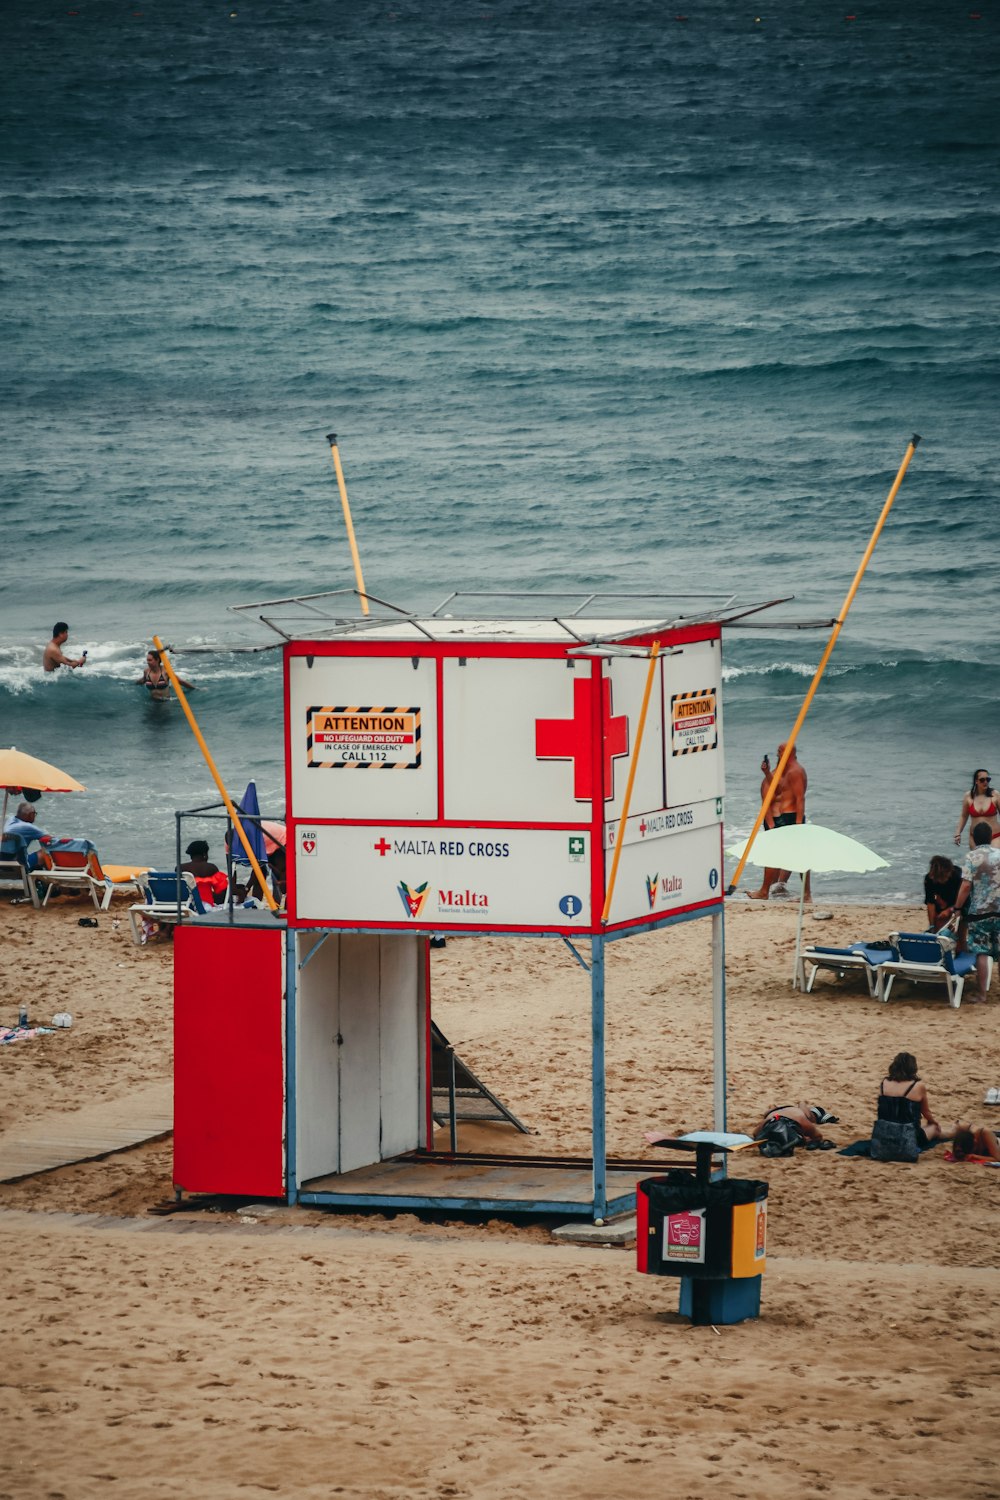 a lifeguard station on the beach with people in the water